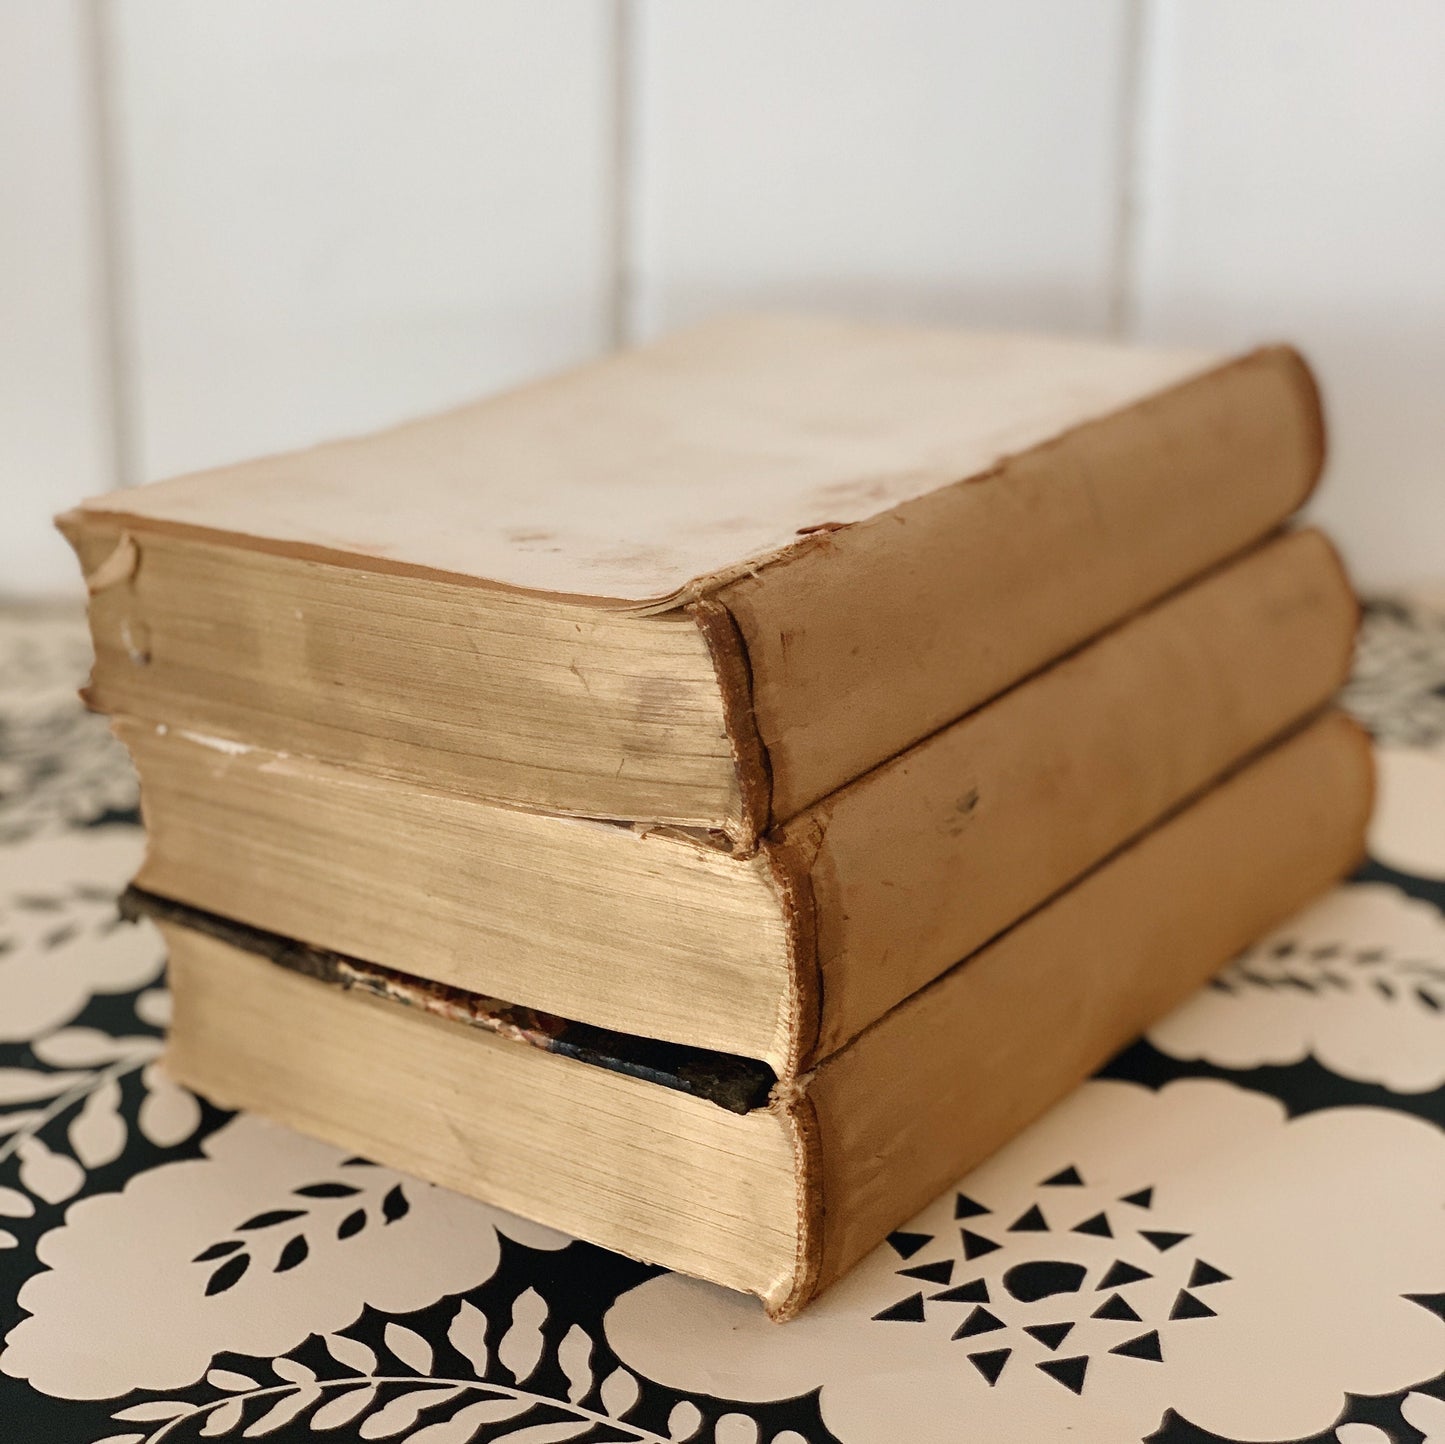 Unbound and Distressed Books for Decor - Antique Book Bundle, William Makepeace Thackeray